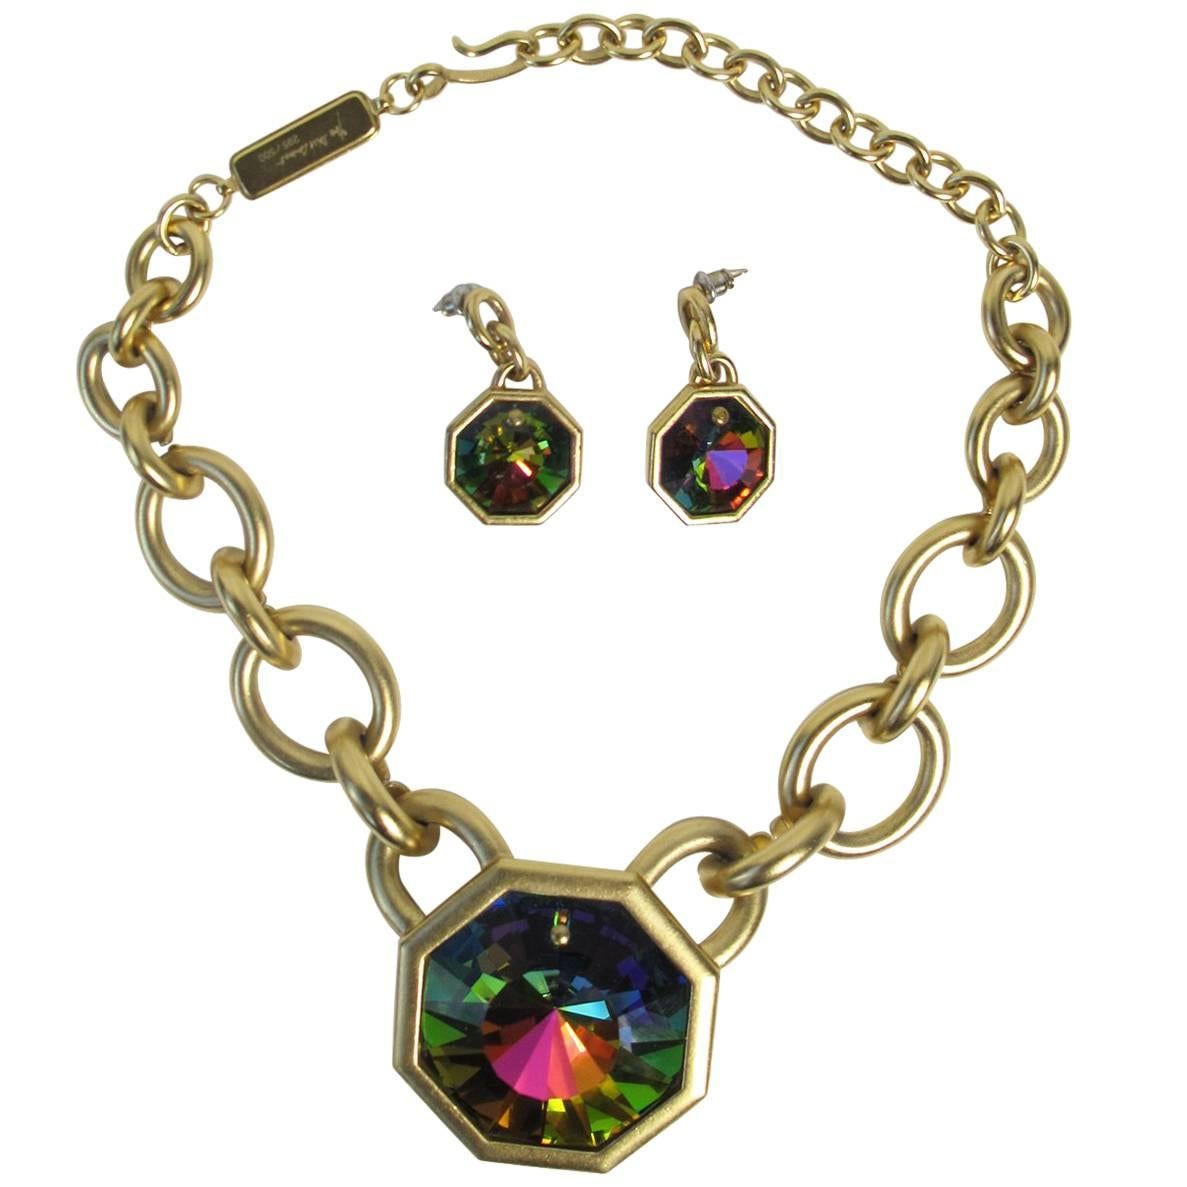 Yves Saint Laurent Ltd Ed Iridescent Crystal Necklace and Earrings Set, 1980s 